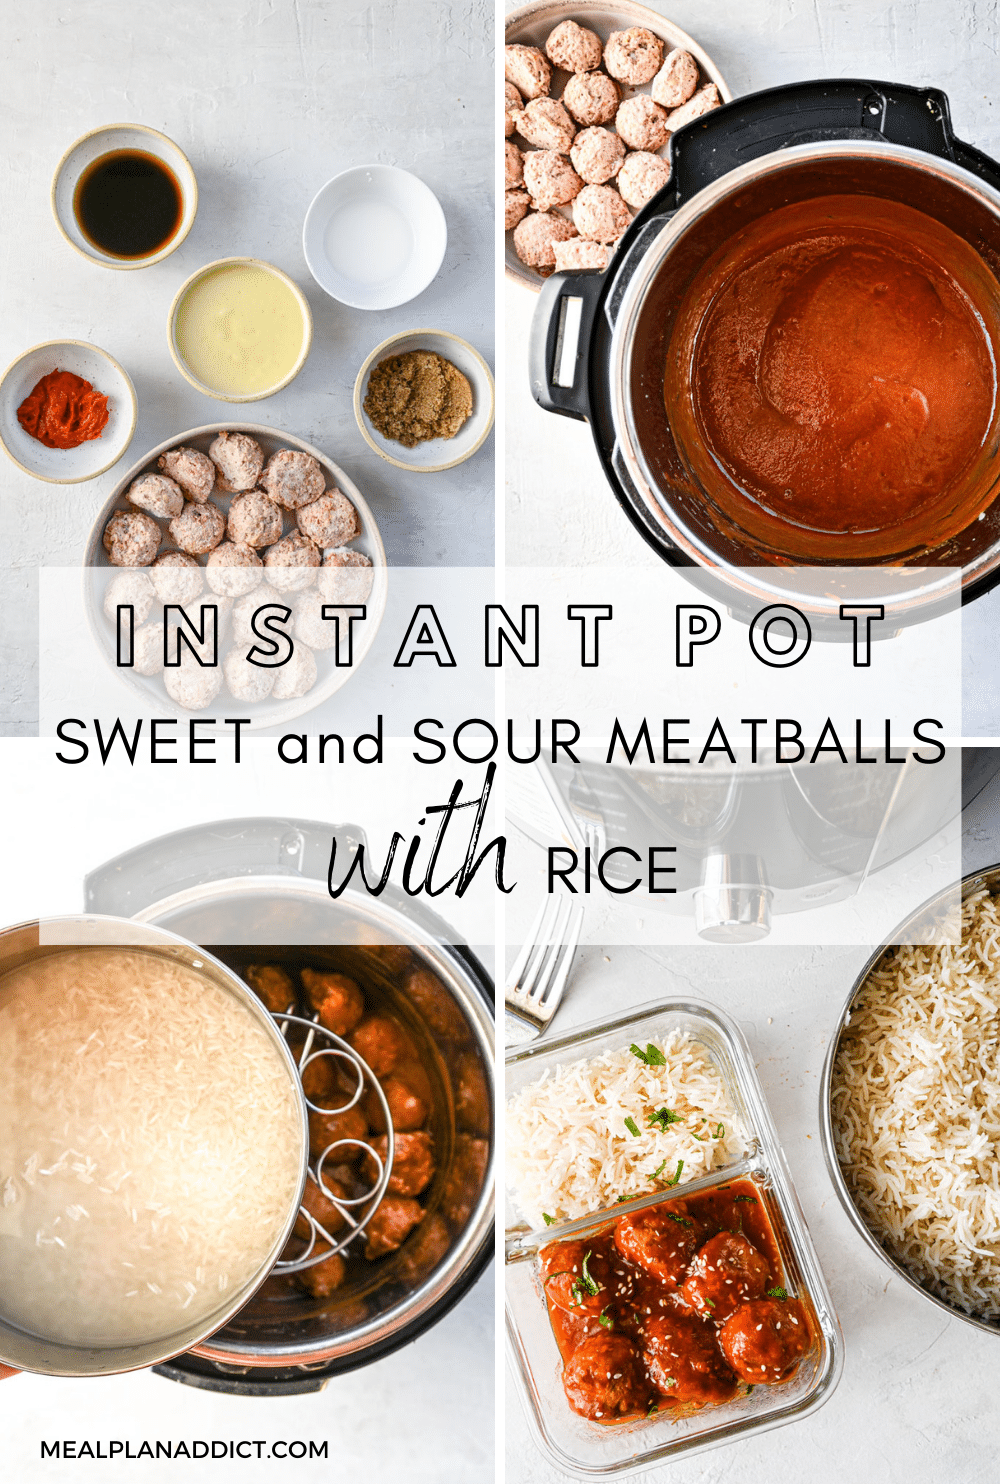 Meatballs with rice pin from Pinterest